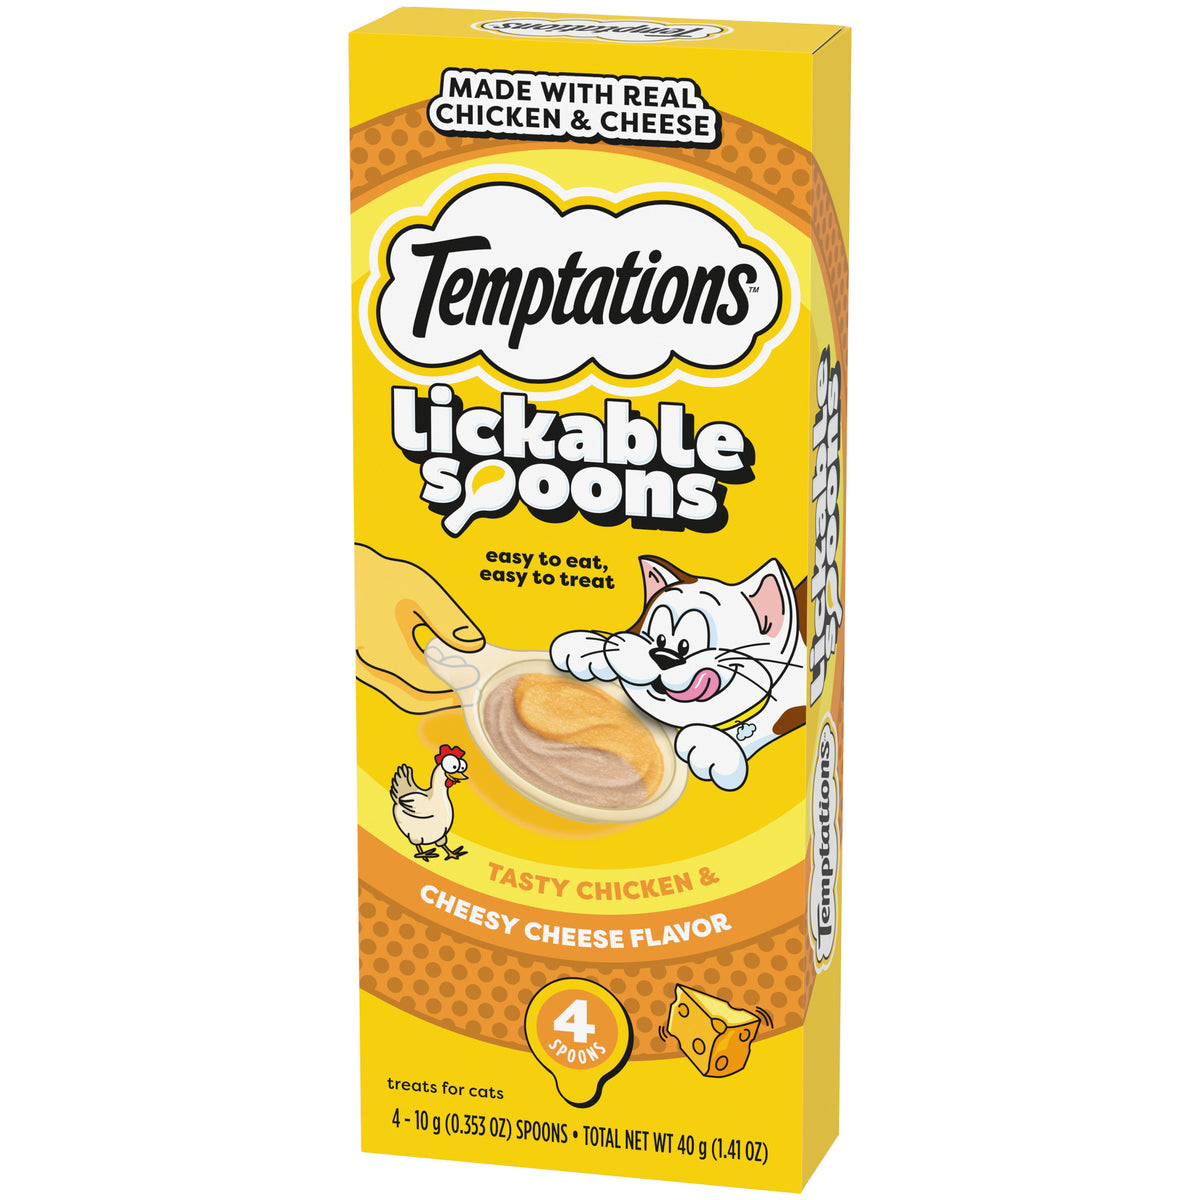 [Temptations][Temptations Lickable Spoons, Tasty Chicken and Cheesy Cheese, Pack of 4][Image Center Right (3/4 Angle)]